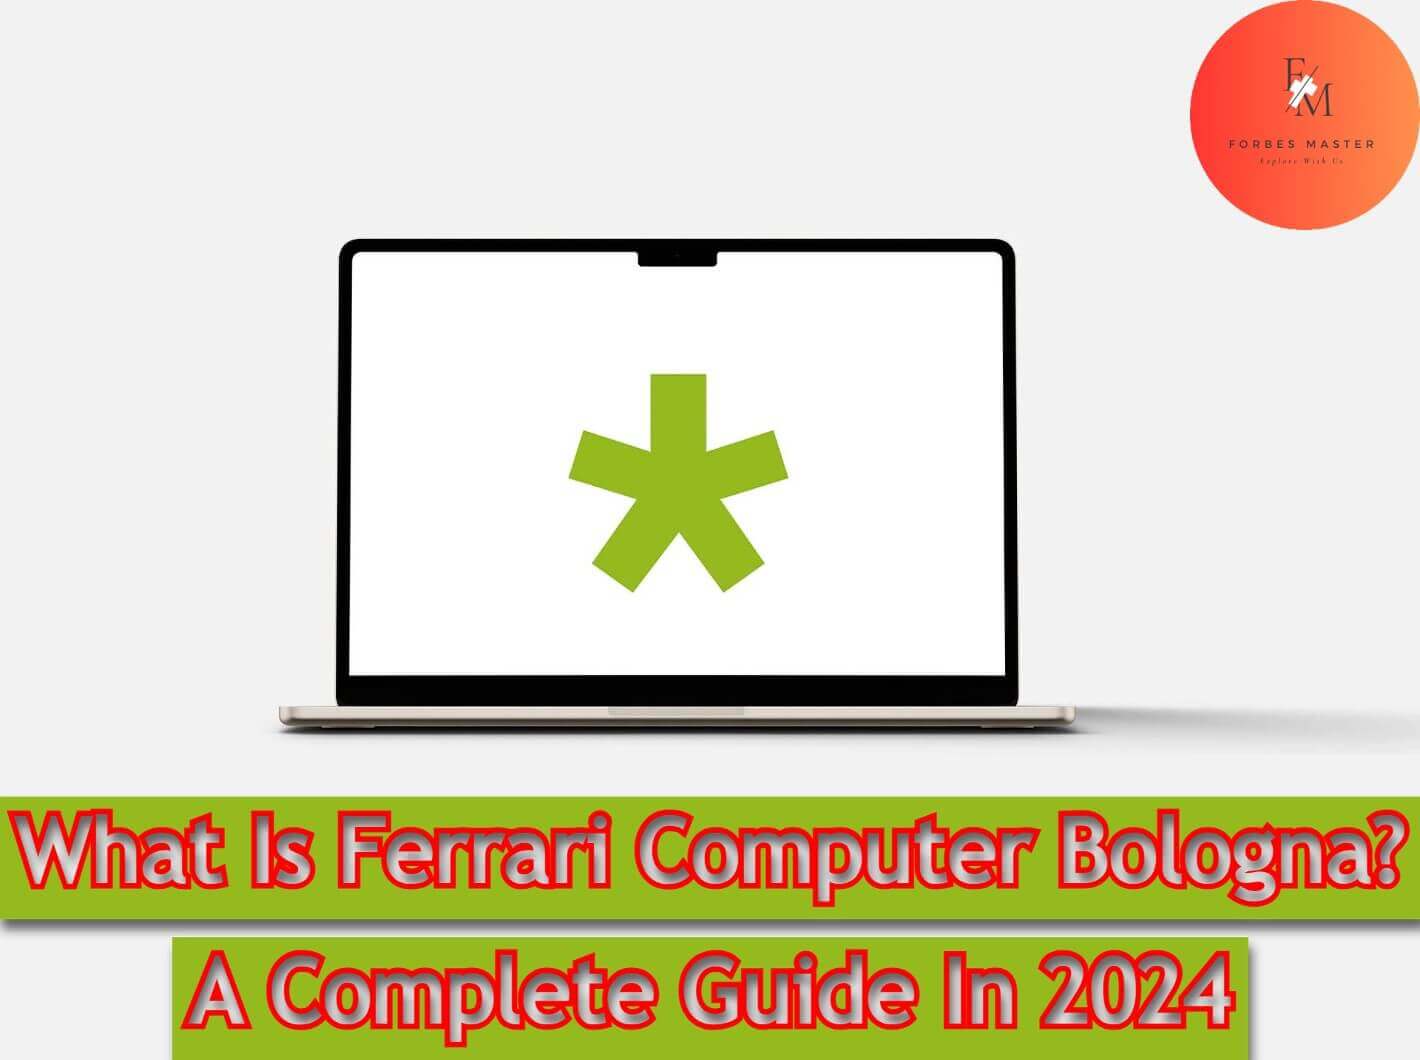 What Is Fеrrari Computеr Bologna? A Complete Guide In 2024